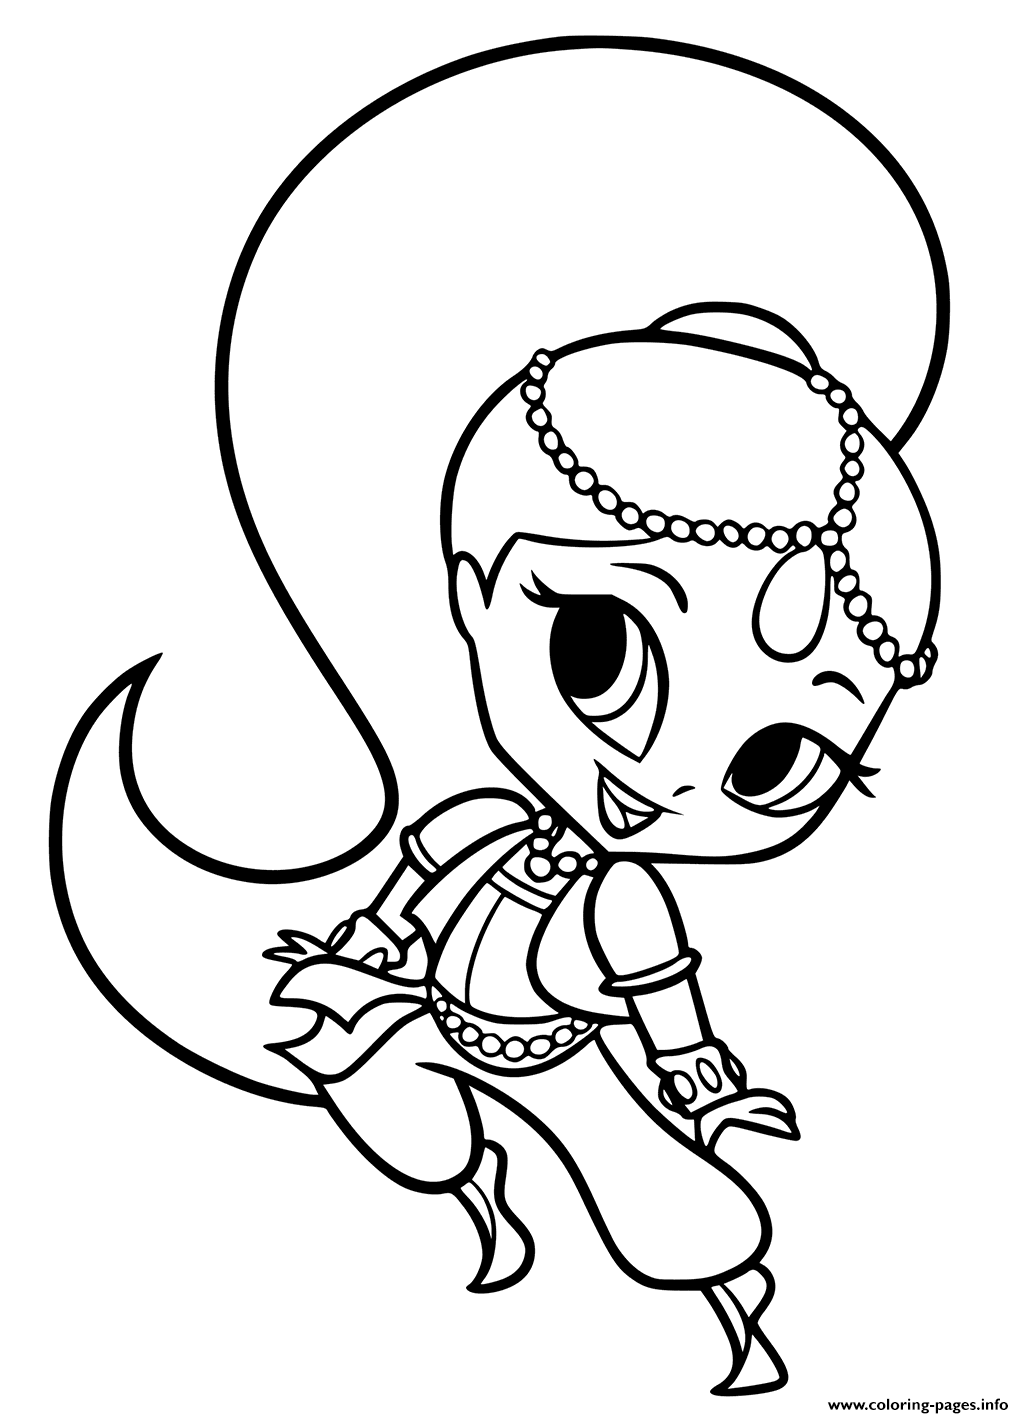 shopkins-coloring-pages-with-names-coloringpages2019